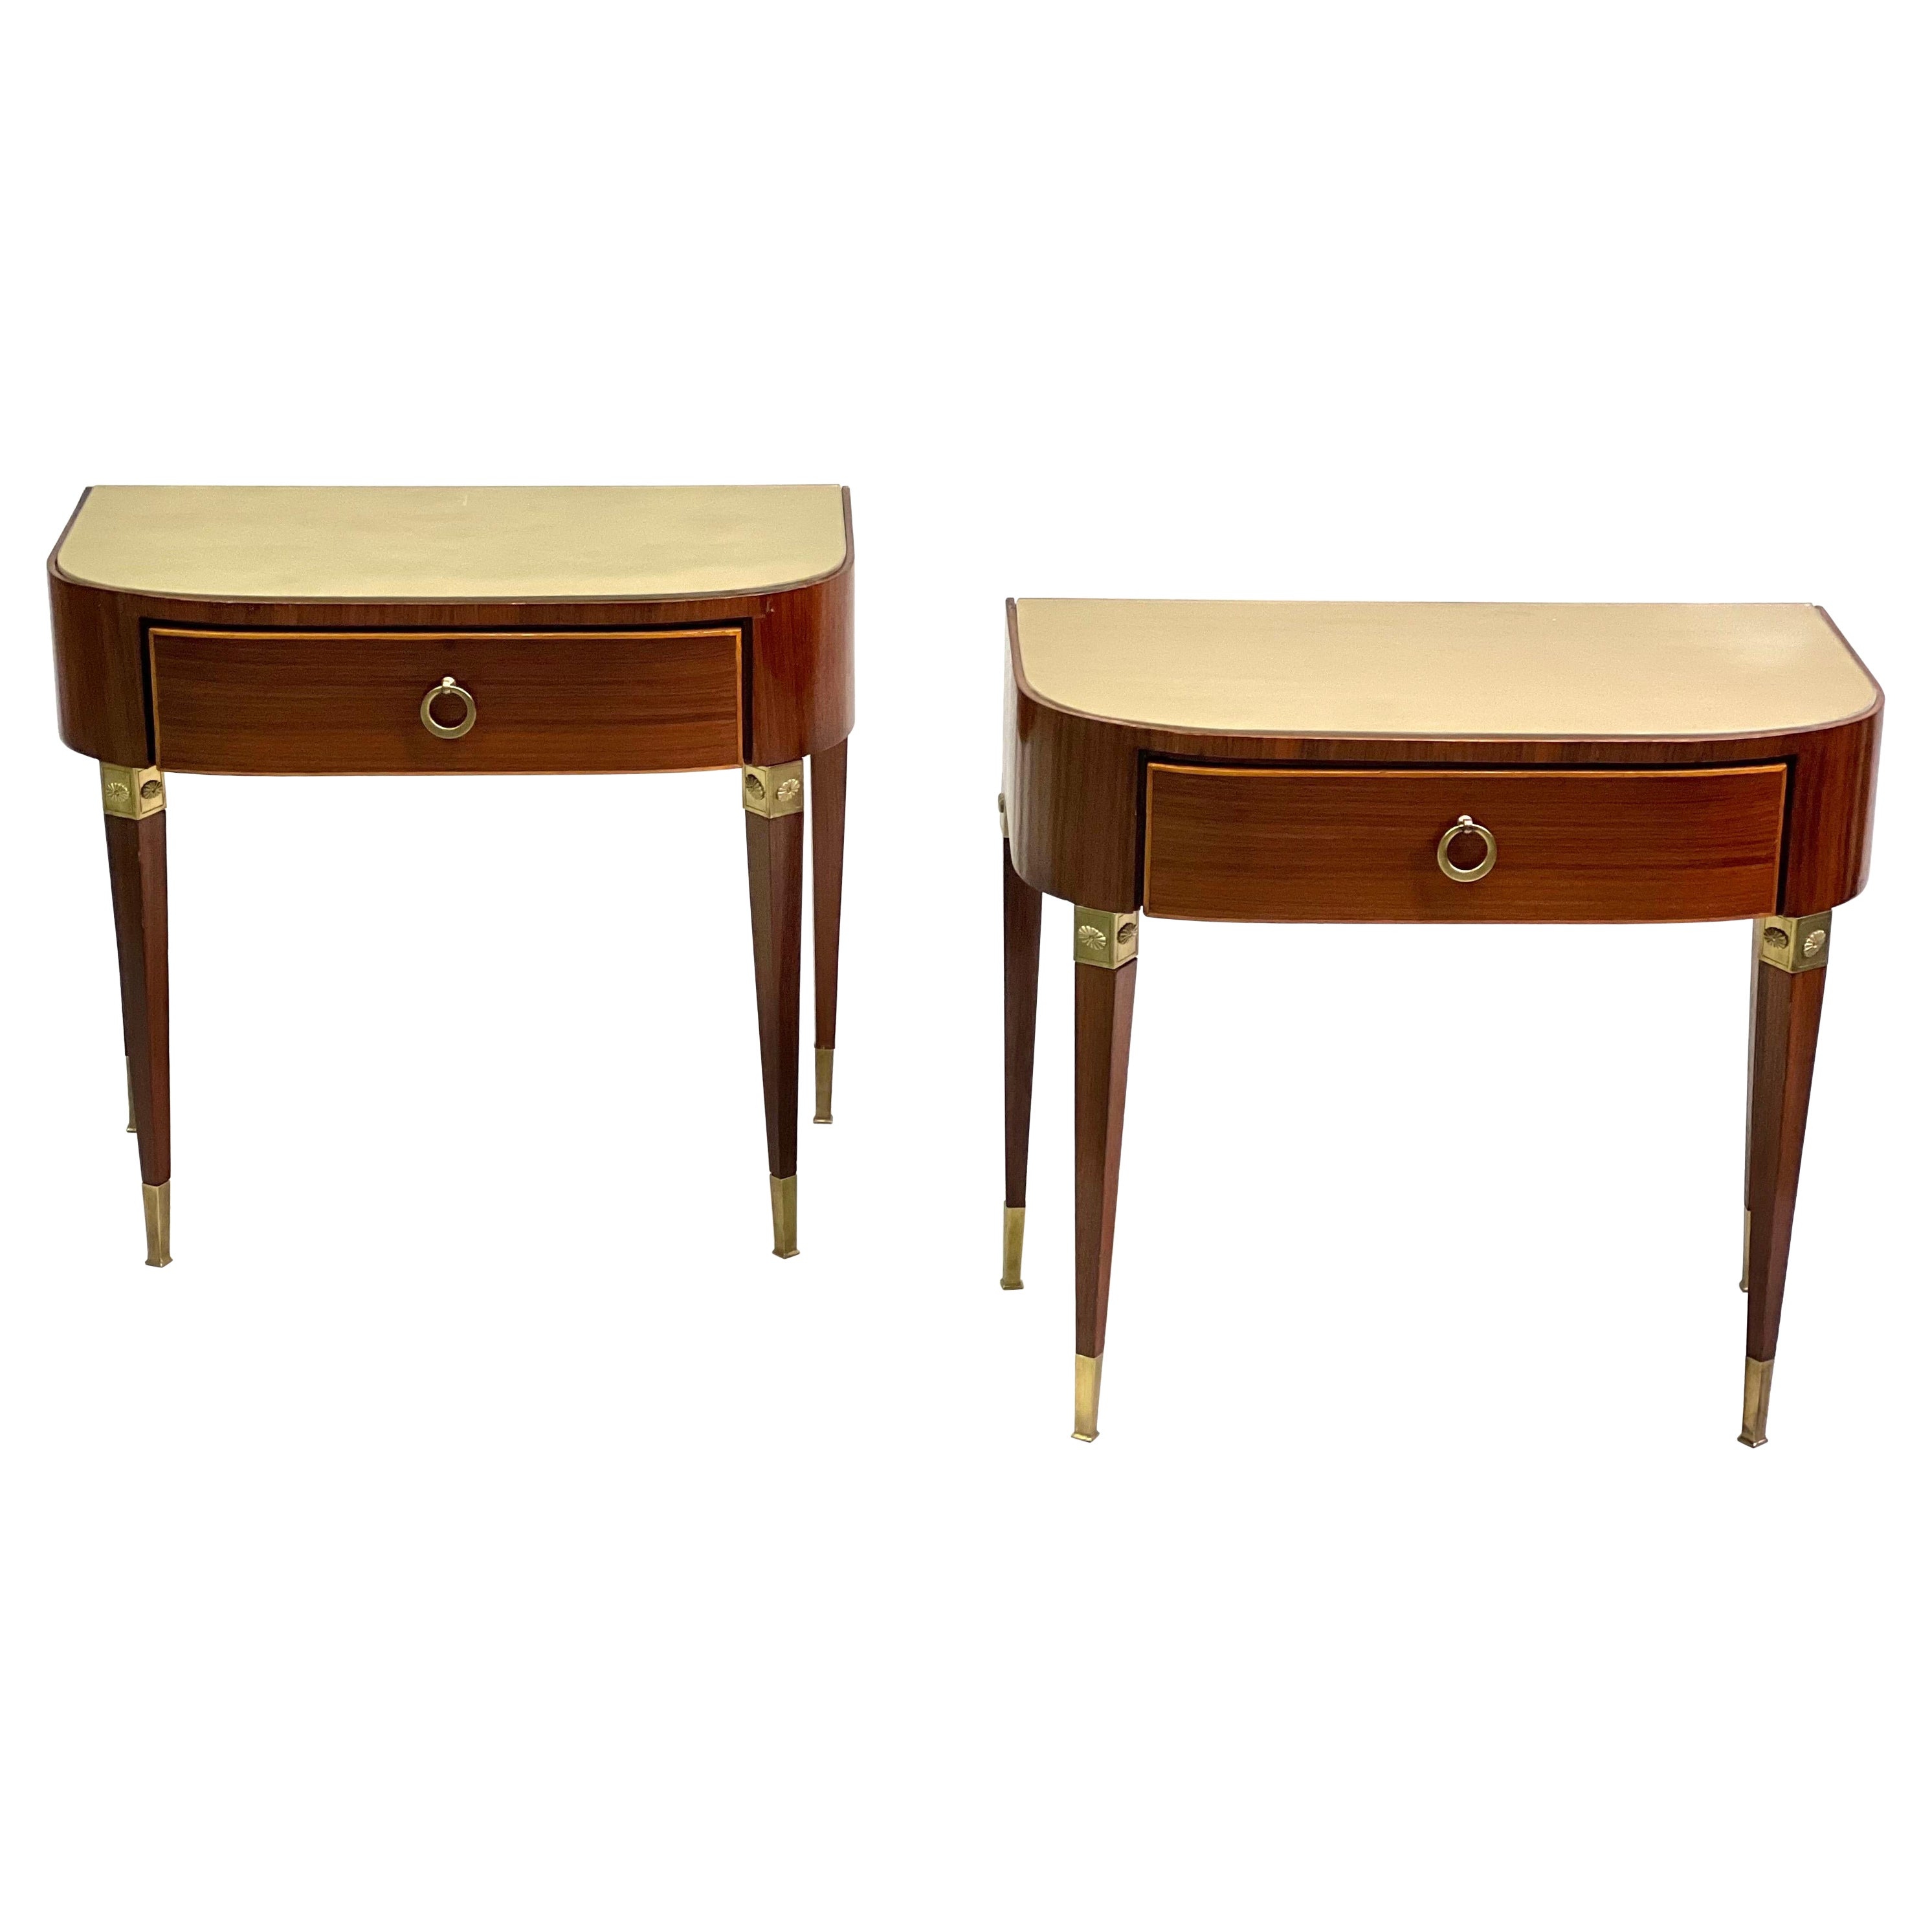 Pair of Italian Modern Neoclassical End or Side Tables / Nightstands, Gio Ponti